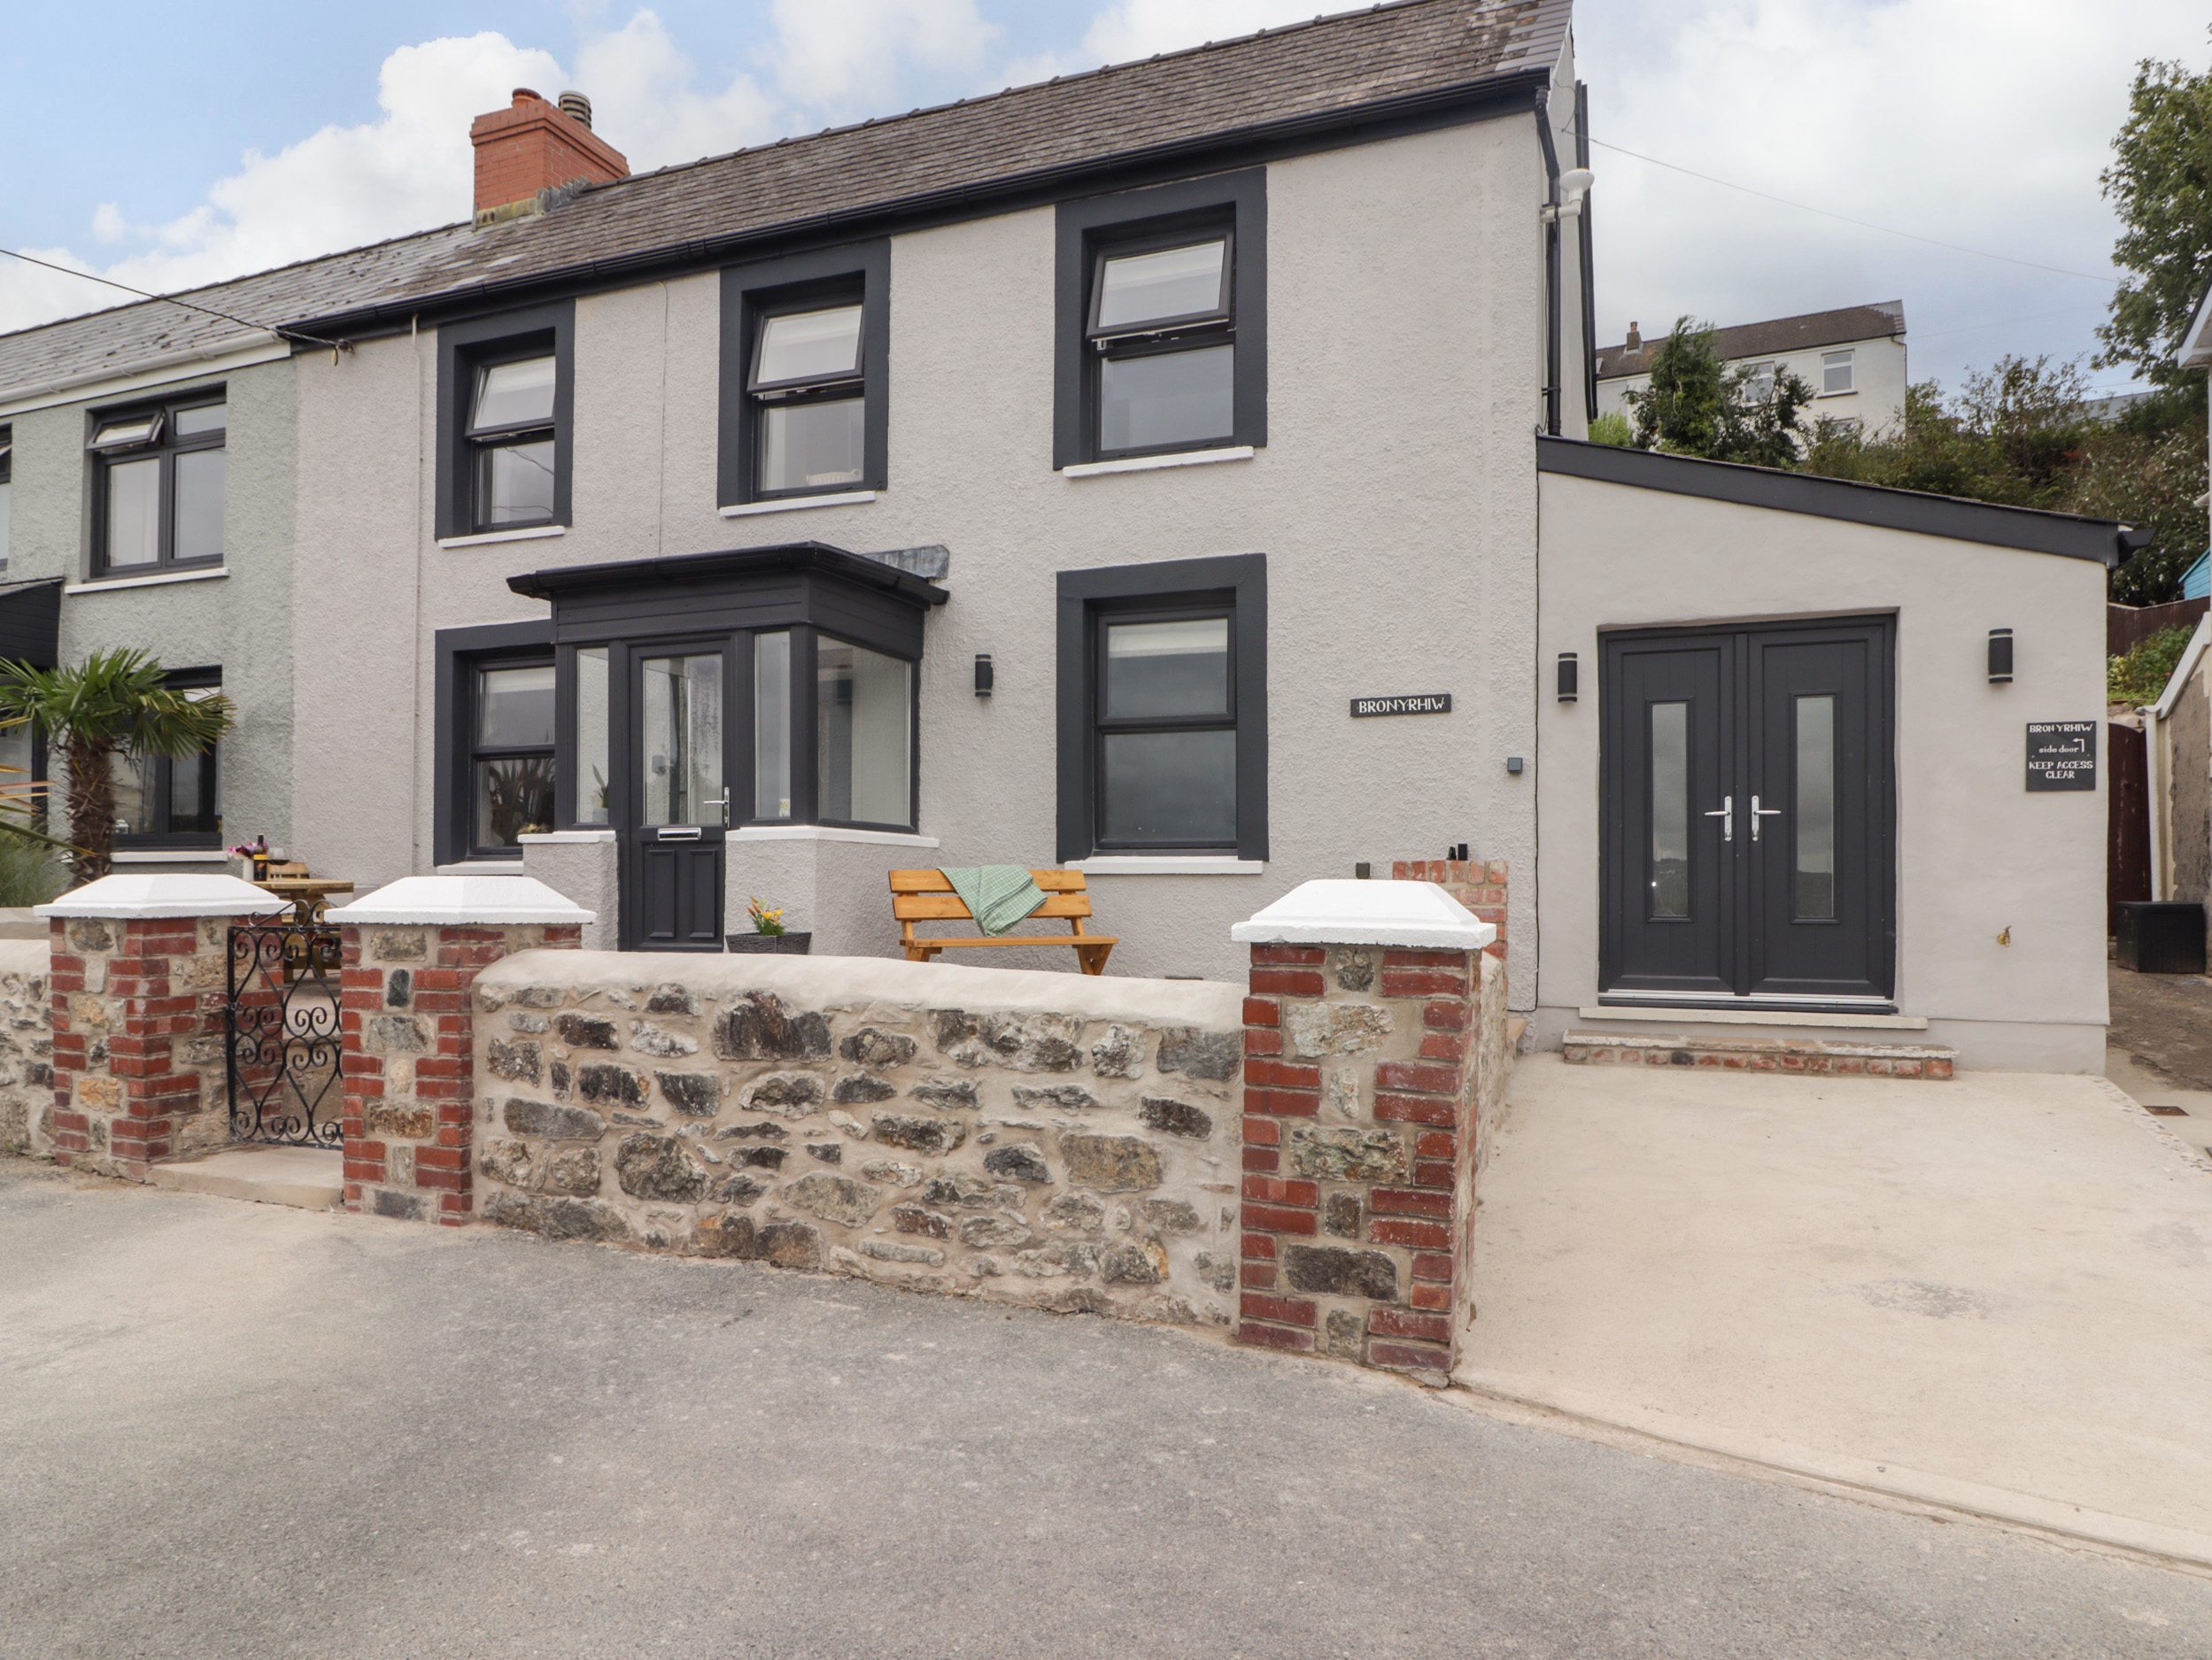 3 bedroom Cottage for rent in Goodwick